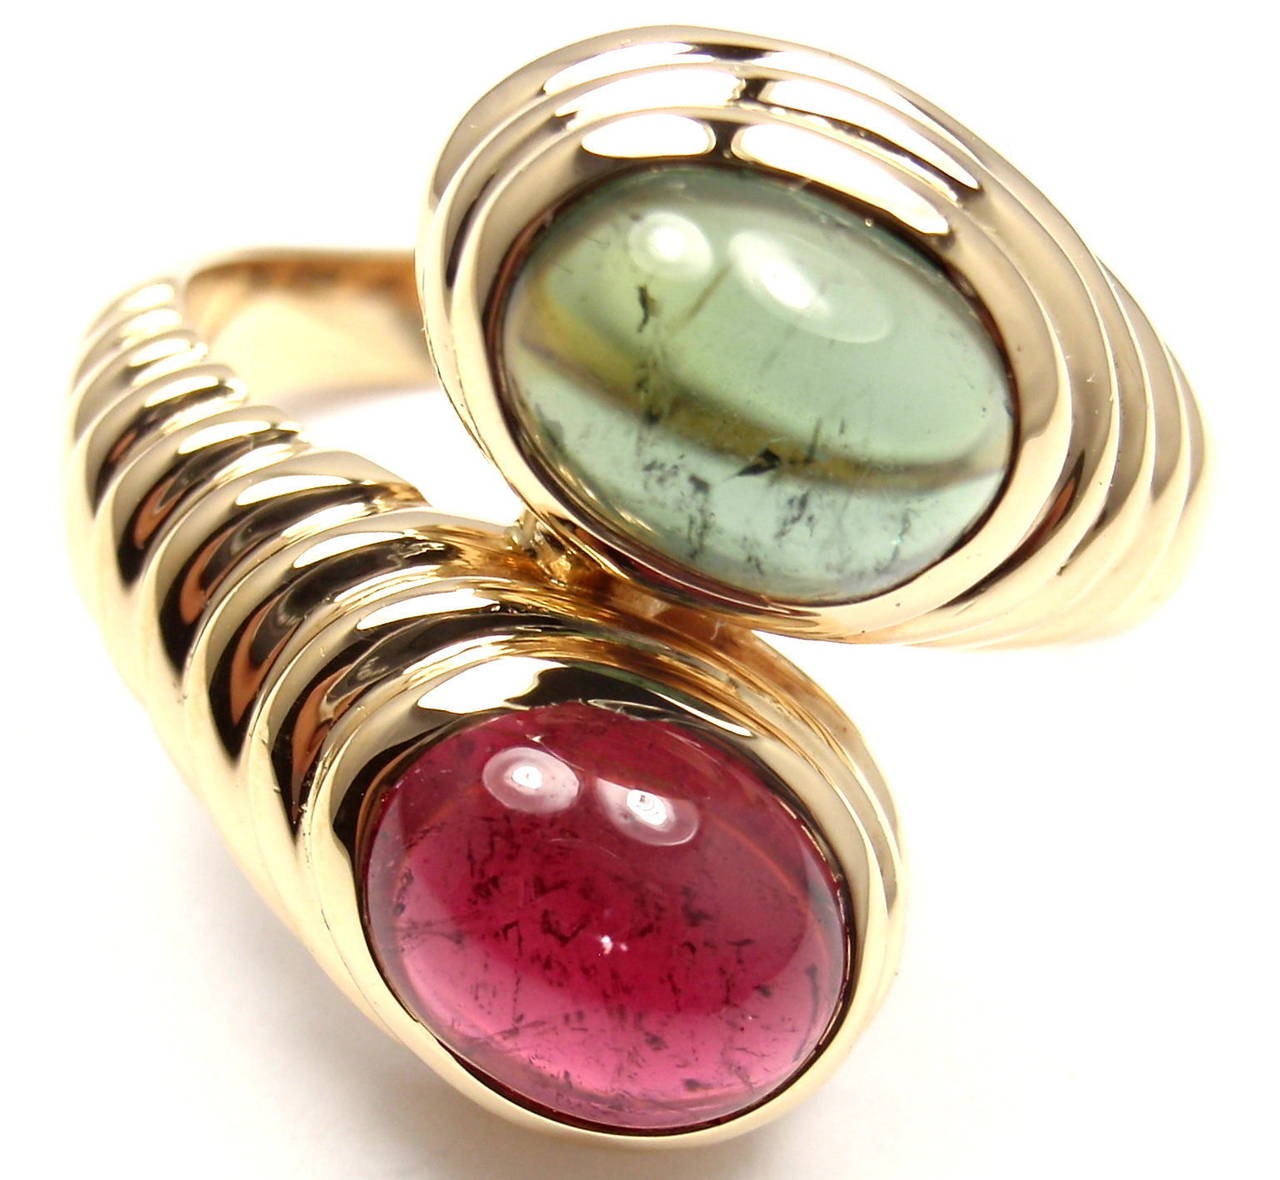 18k Yellow Gold Pink & Green Tourmaline Ring By Bulgari. With 1 Oval Pink Tourmaline 7mm x 10mm and 1 Oval Green Tourmaline 7mm x 10mm

Details:
Ring Size: 8.5 (resize available)
Width: 20mm
Weight: 13.6 grams
Stamped Hallmarks: Bvlgari